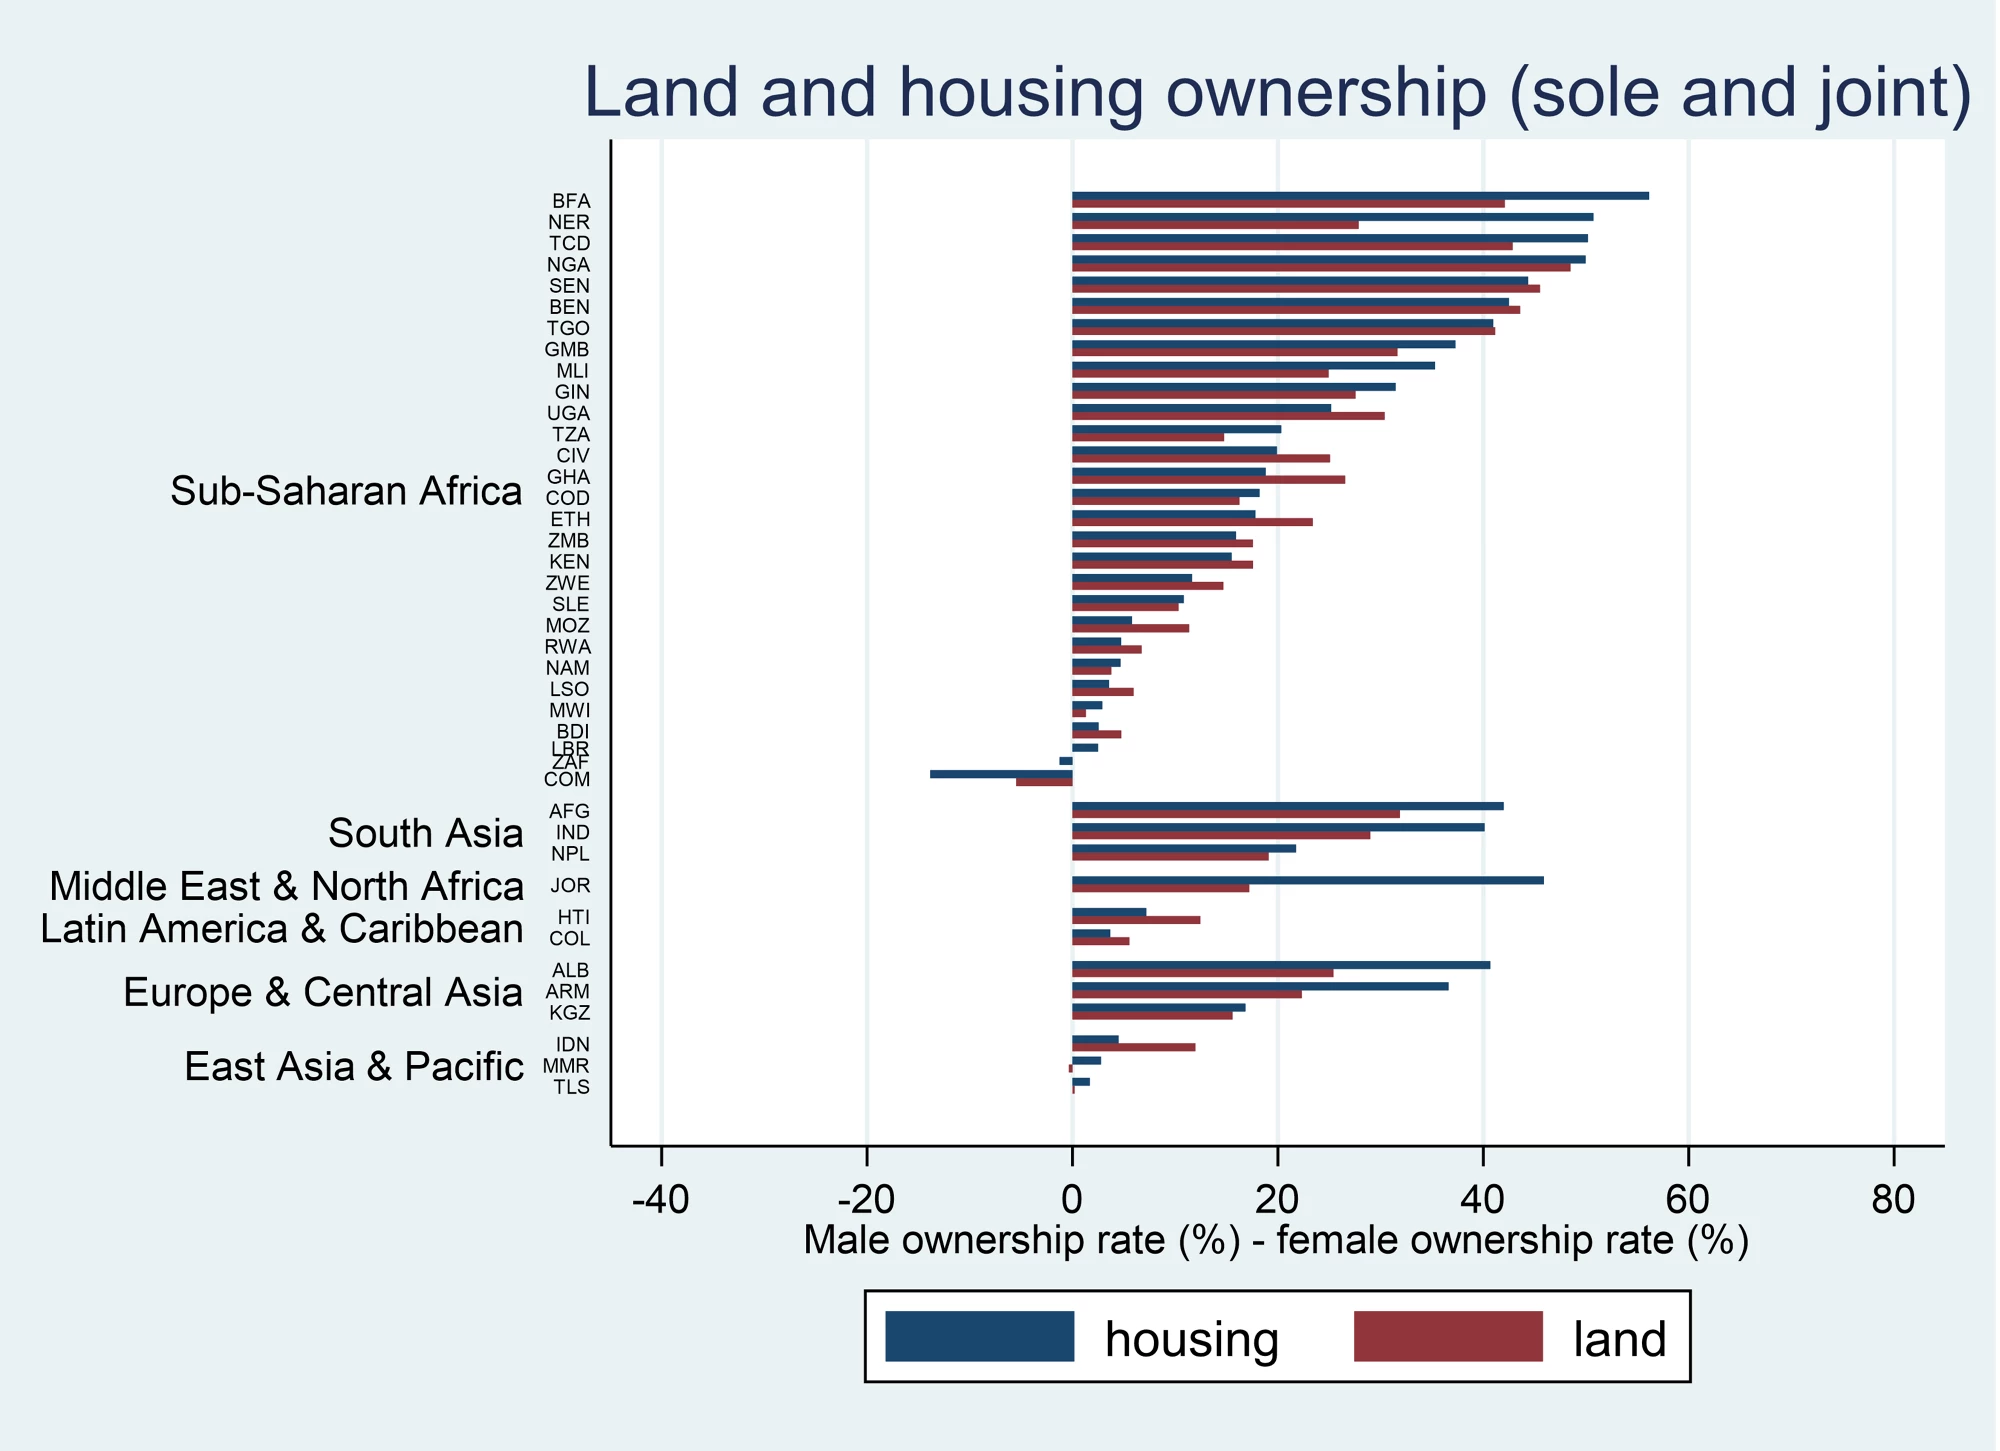 Figure 1: Gender gaps in land and housing ownership among married couples favor men